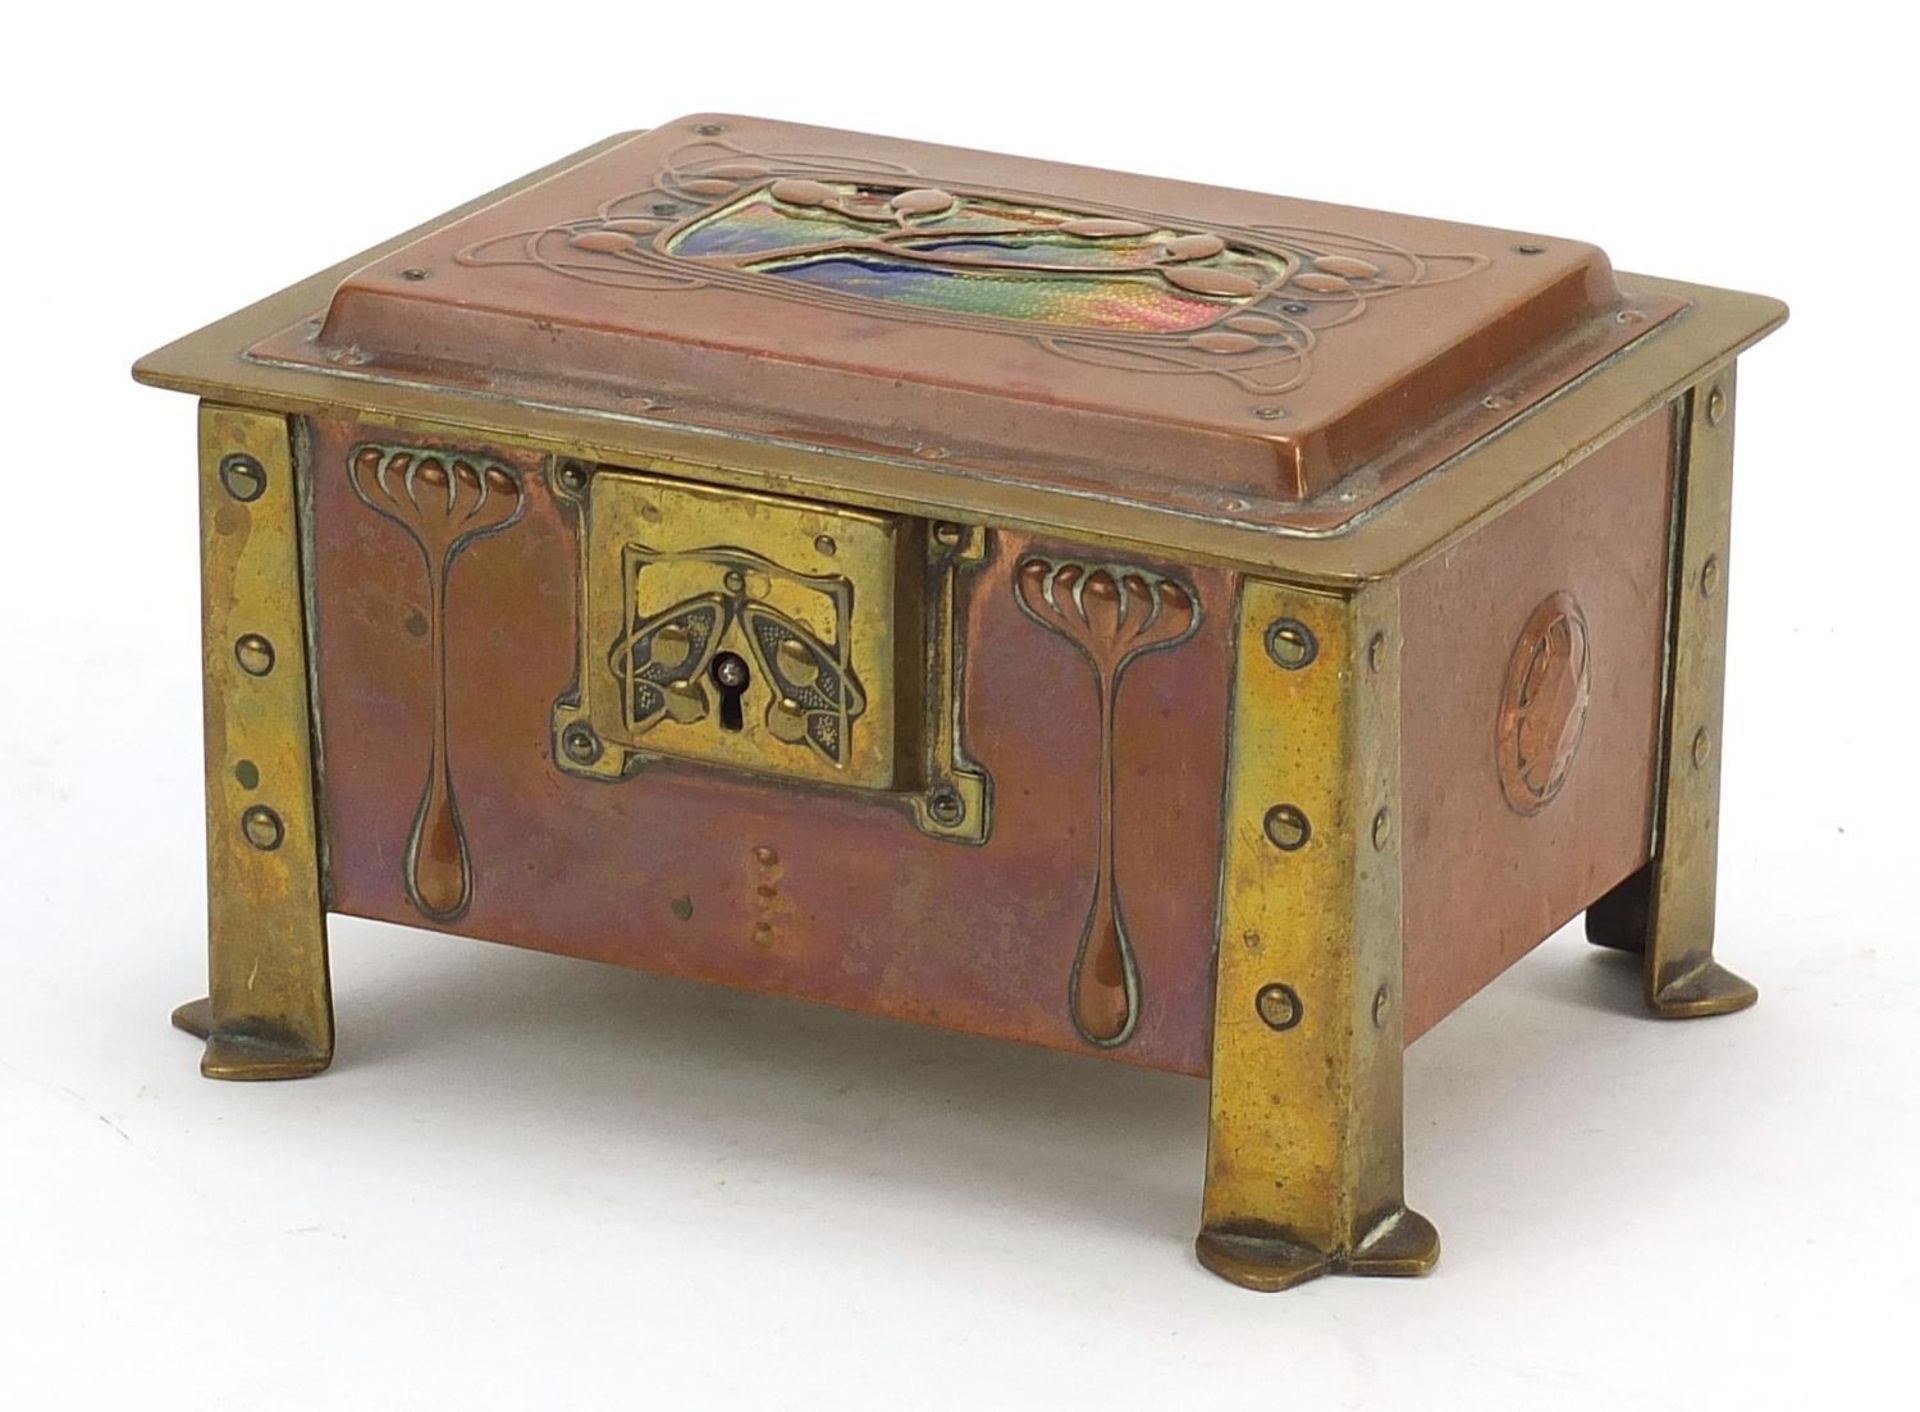 Arts & Crafts enamel, copper and brass casket with embossed floral motifs raised on four stylised